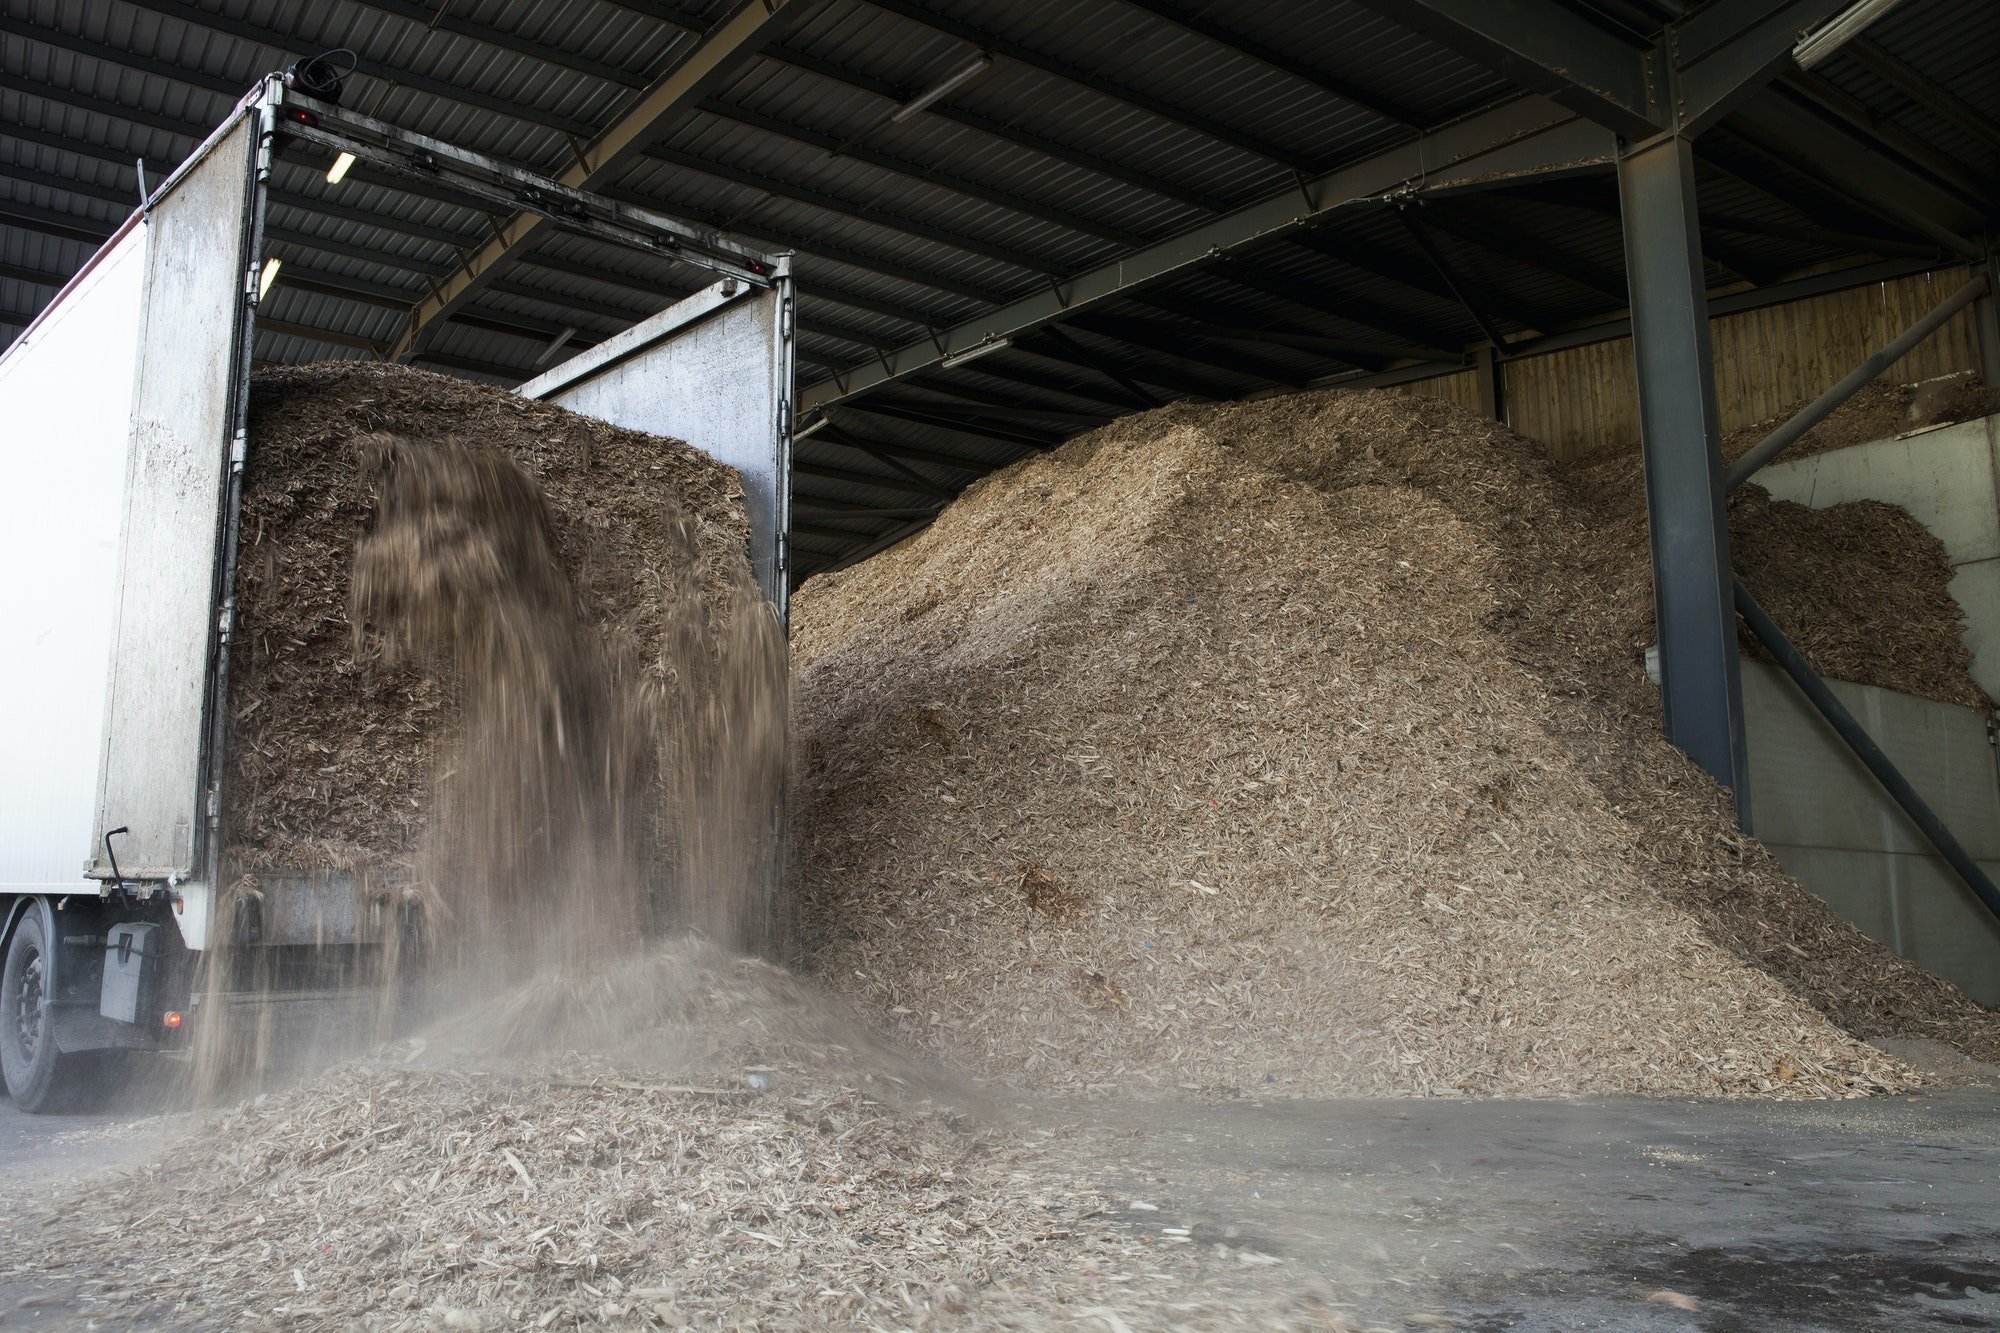 Stored organic waste being poured from a lorry into a large warehouse for biomass fuel production.